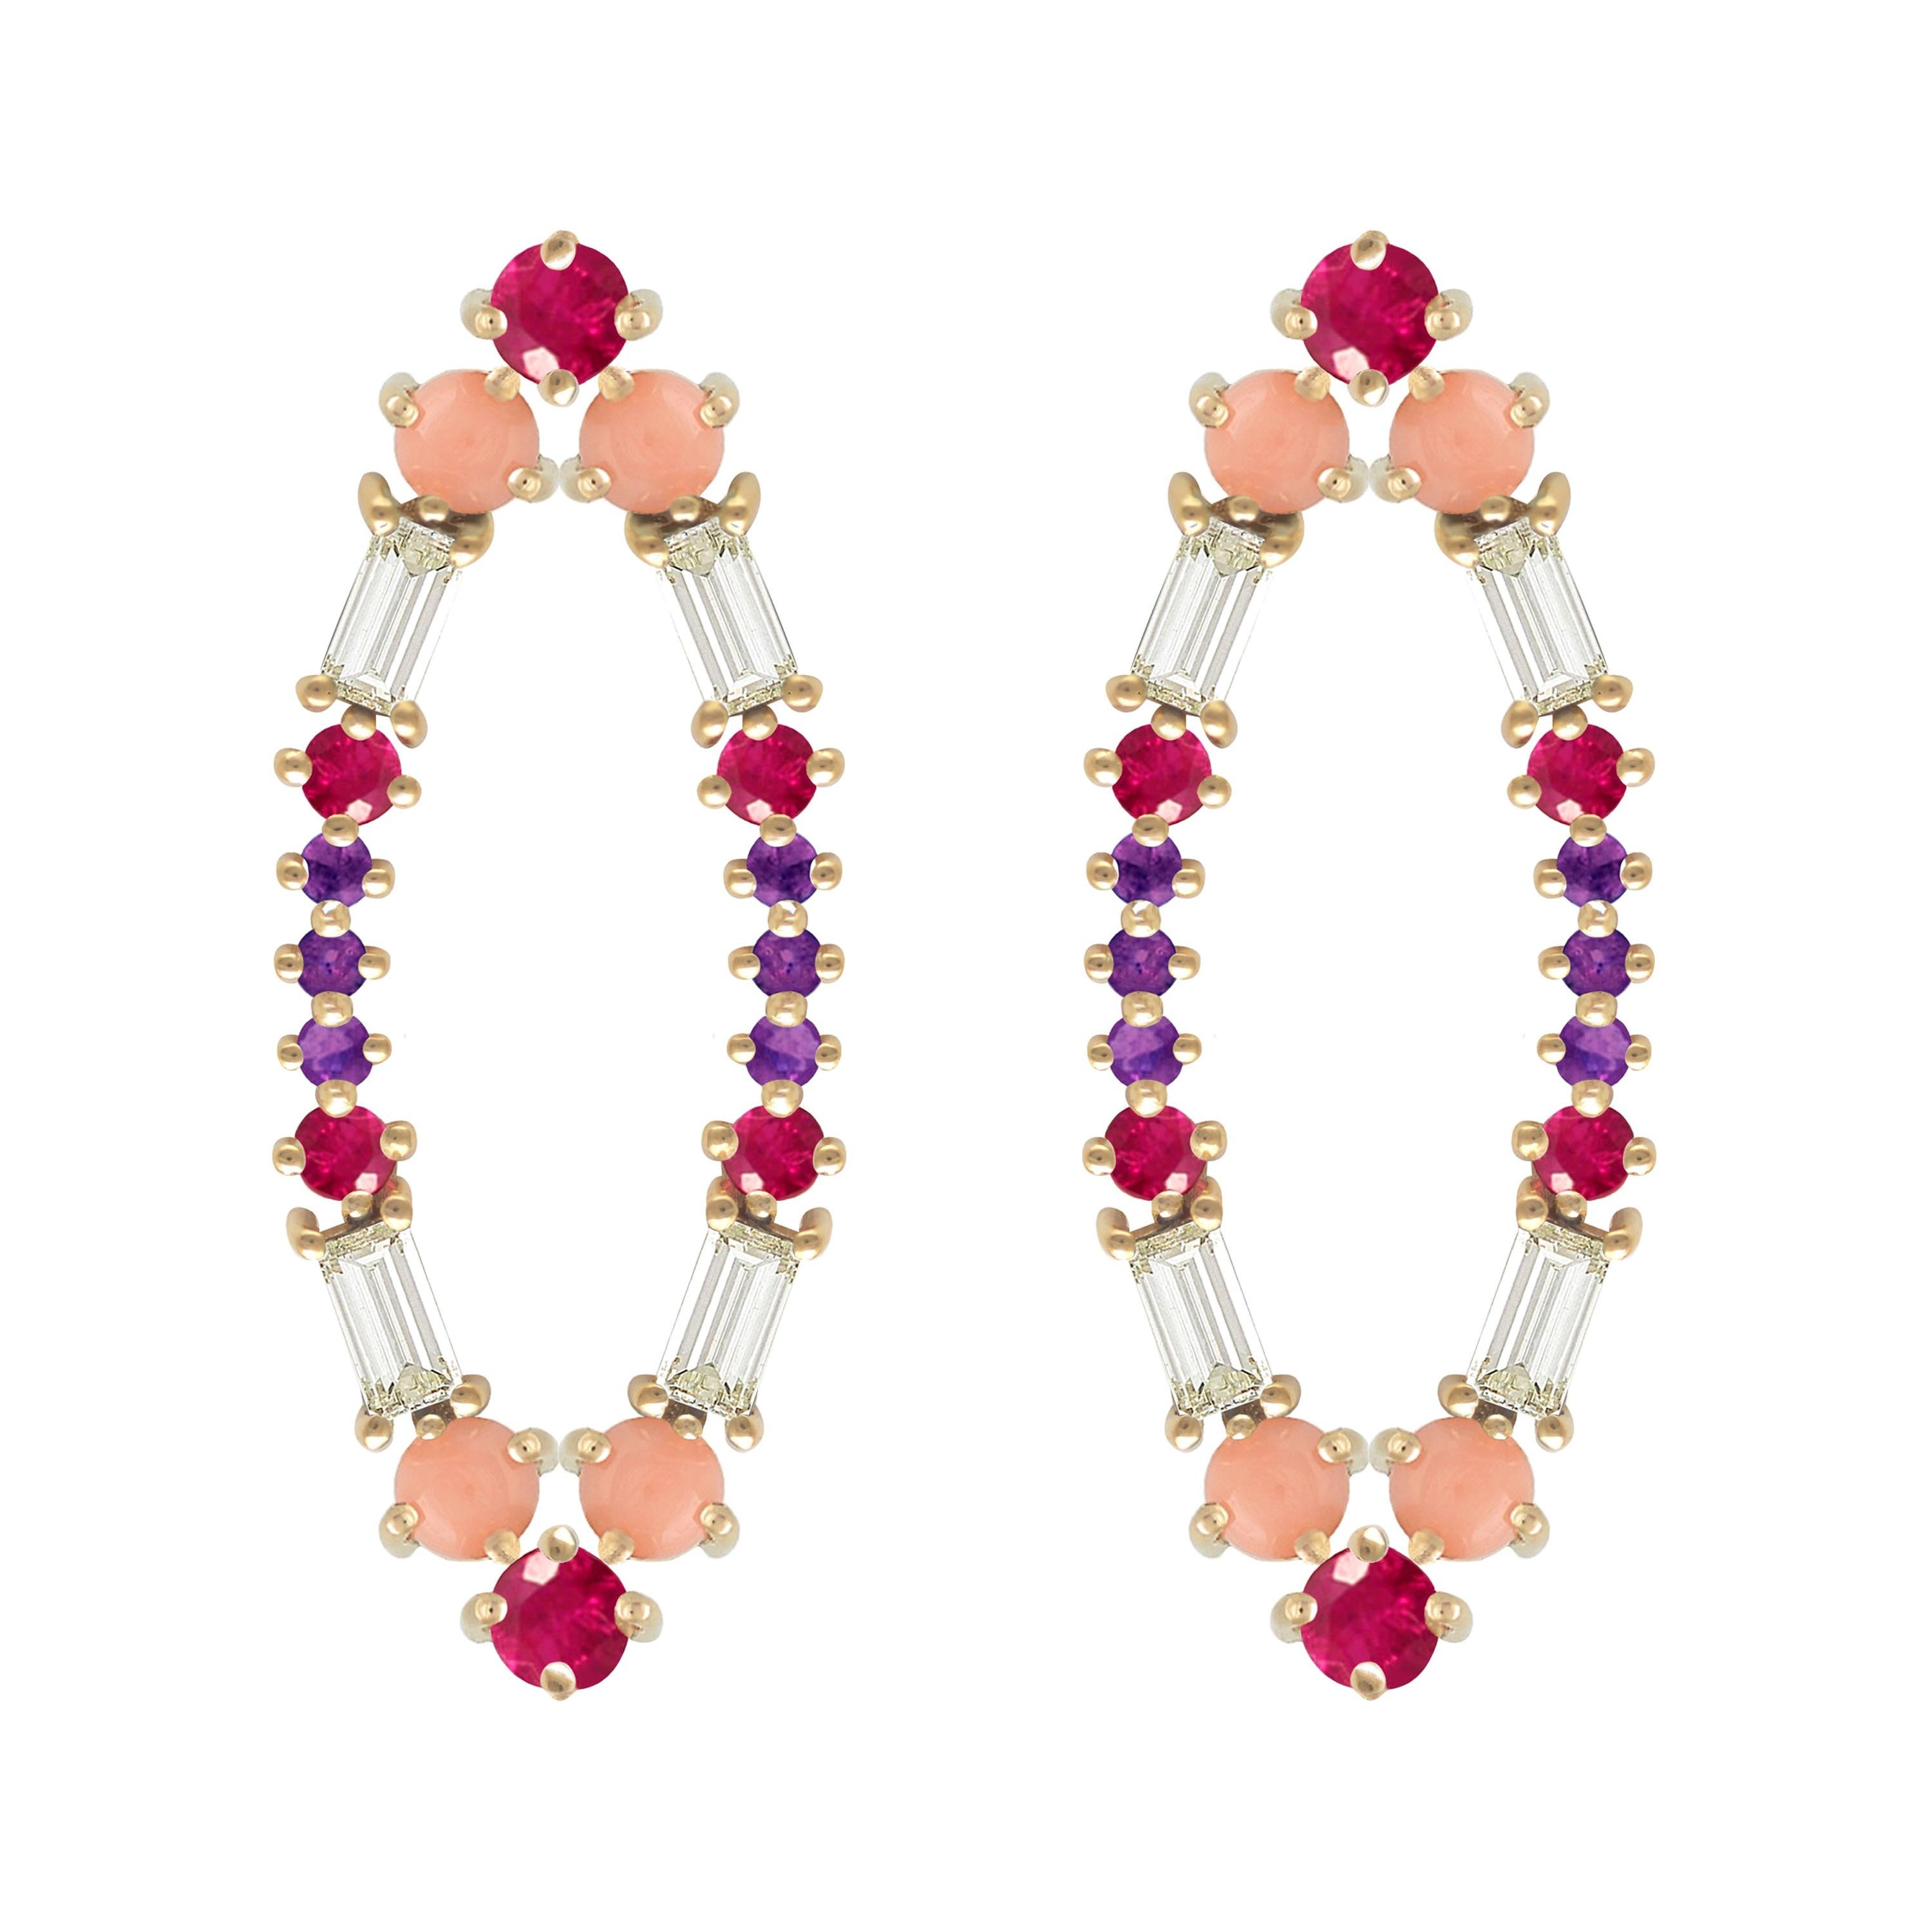 Colorful Earrings in 18kt Gold with Rubies, Amethysts, Corals and Diamonds